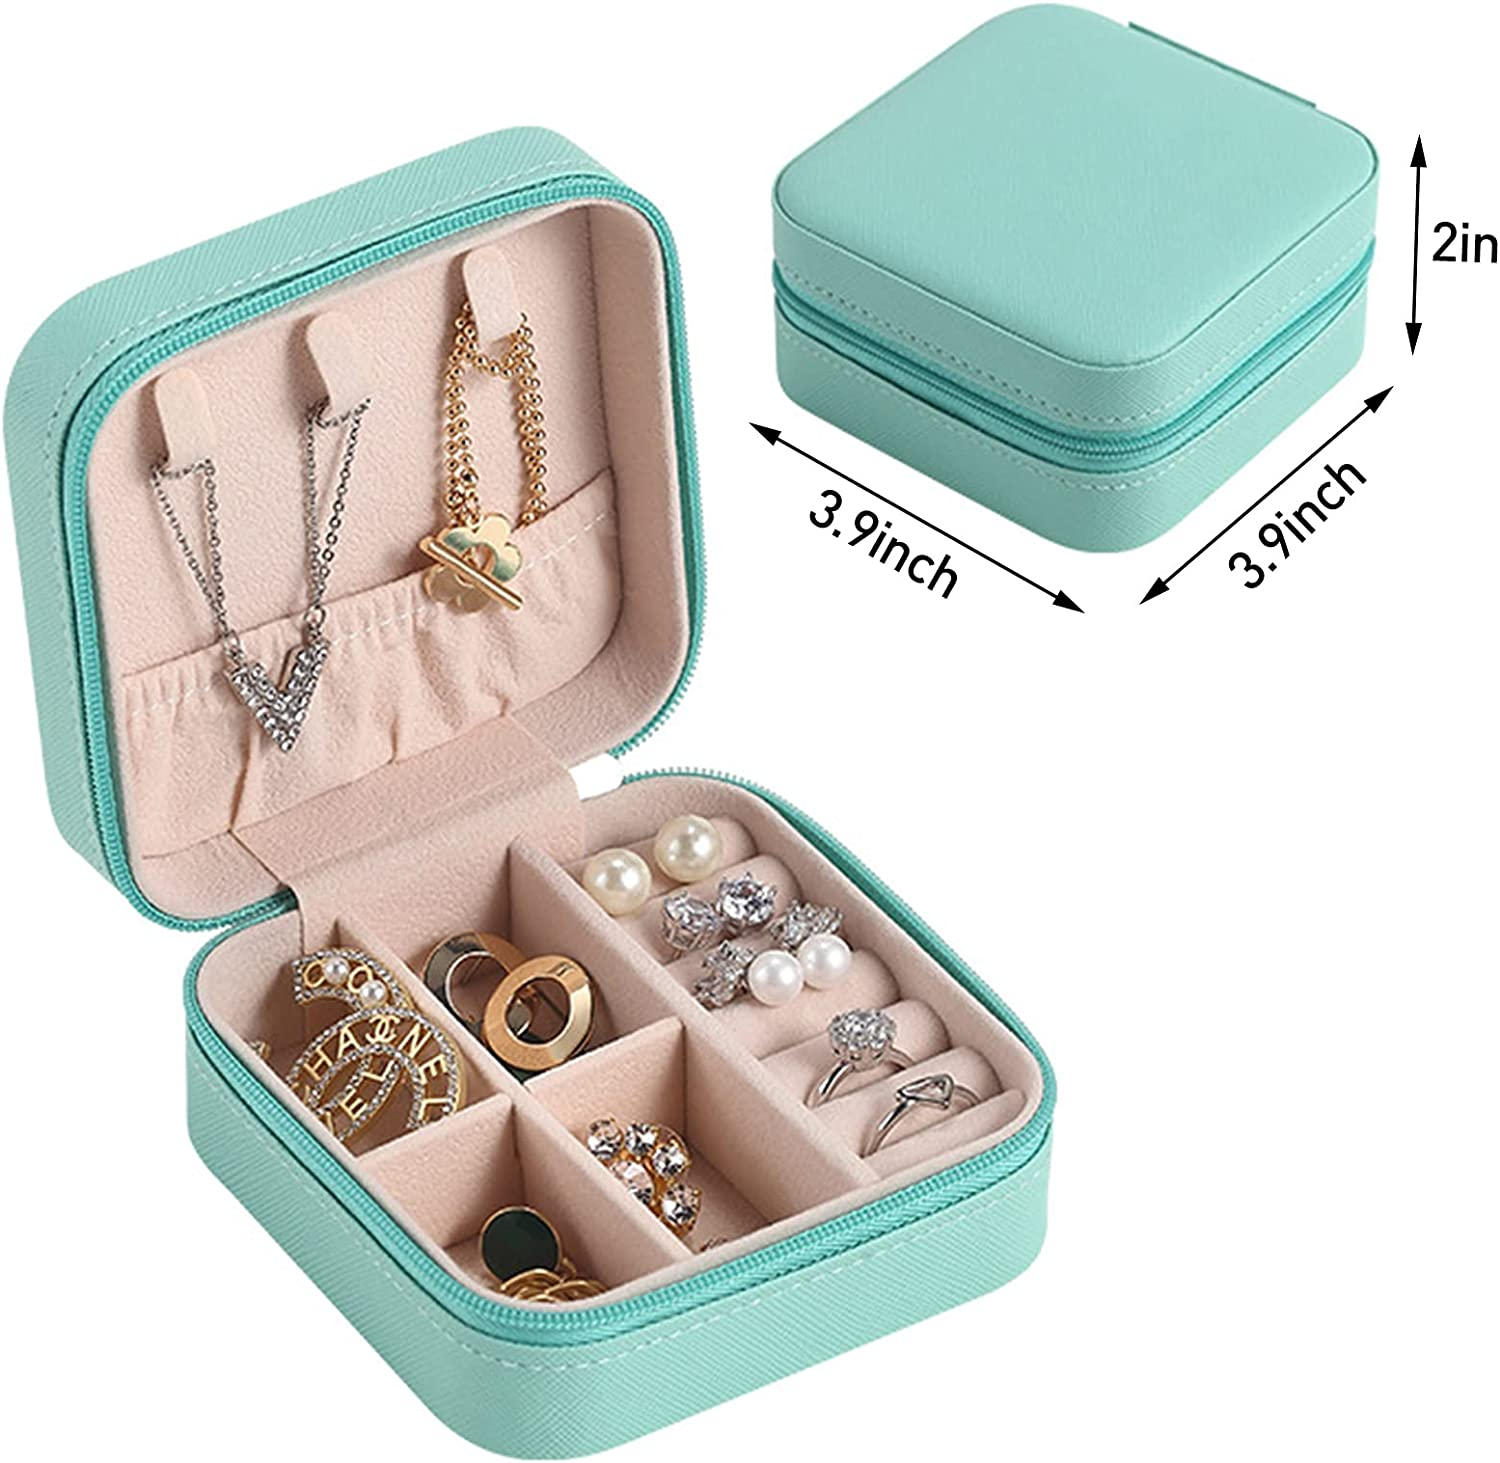 Small Portable Travel Jewelry Box Organizer Display Storage Bag Portable Travel Storage Box for Storage Rings Earrings Necklace (Light Blue)